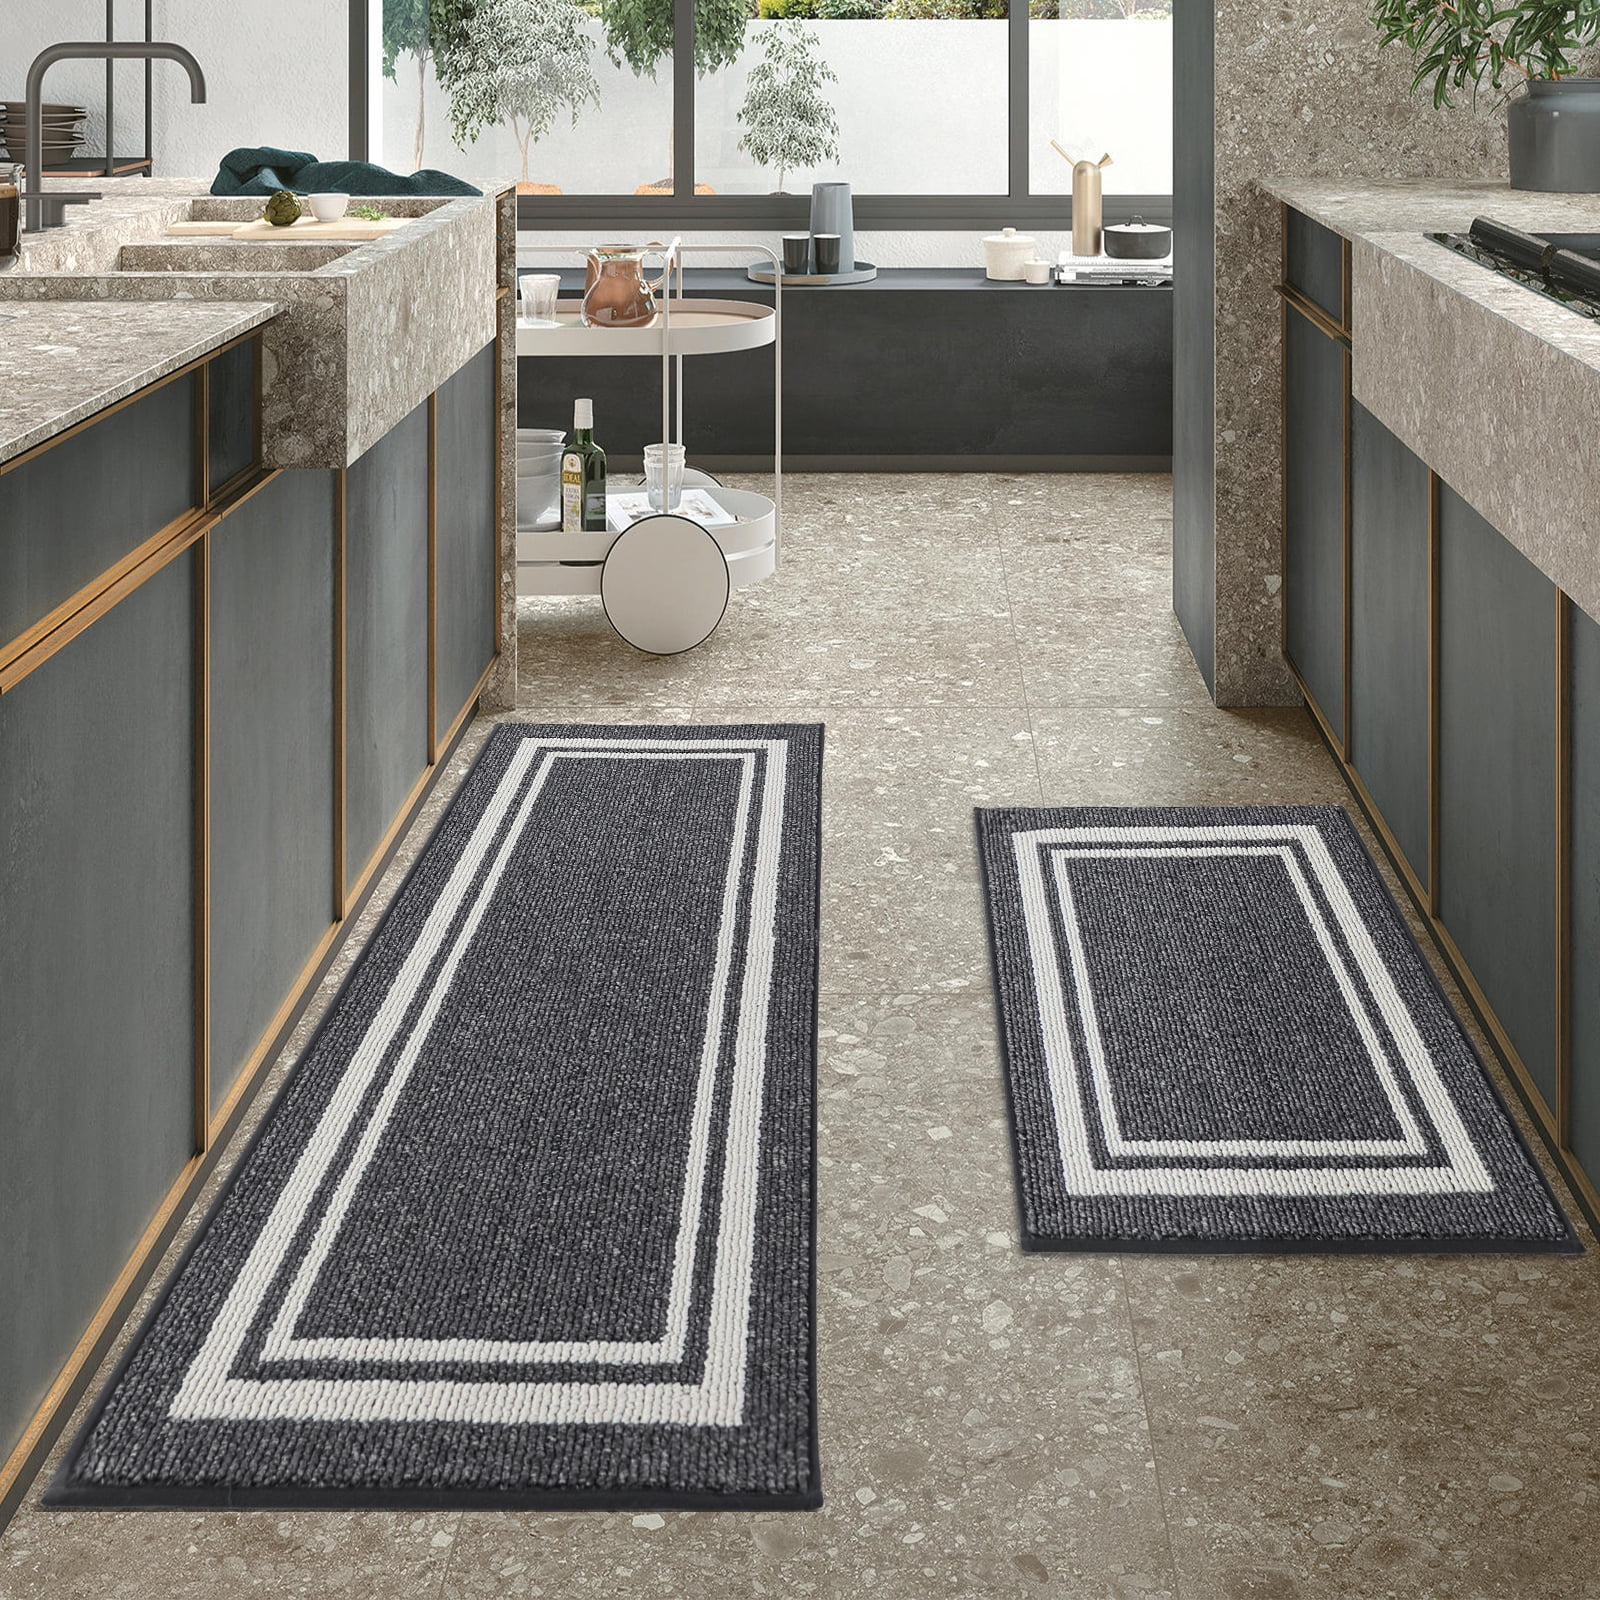 COSY HOMEER Soft Kitchen Rugs [2 PCS] for in Front of Sink Super Absorbent  Kitchen Floor Mats and Mats 20x30 Inch/20X48 Non-Skid Kitchen Mat Standing